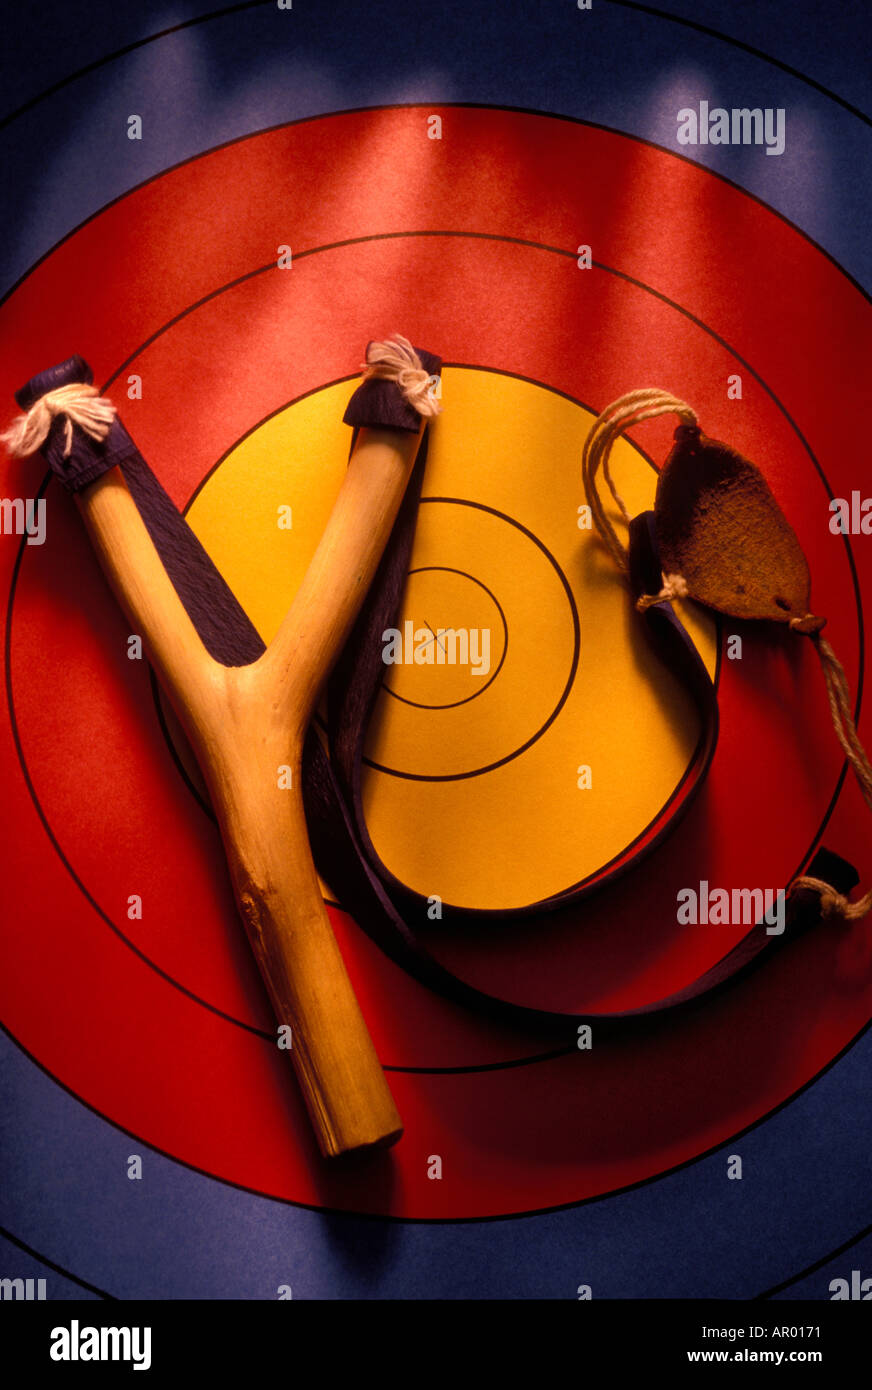 A sling shot made from wood on target Stock Photo